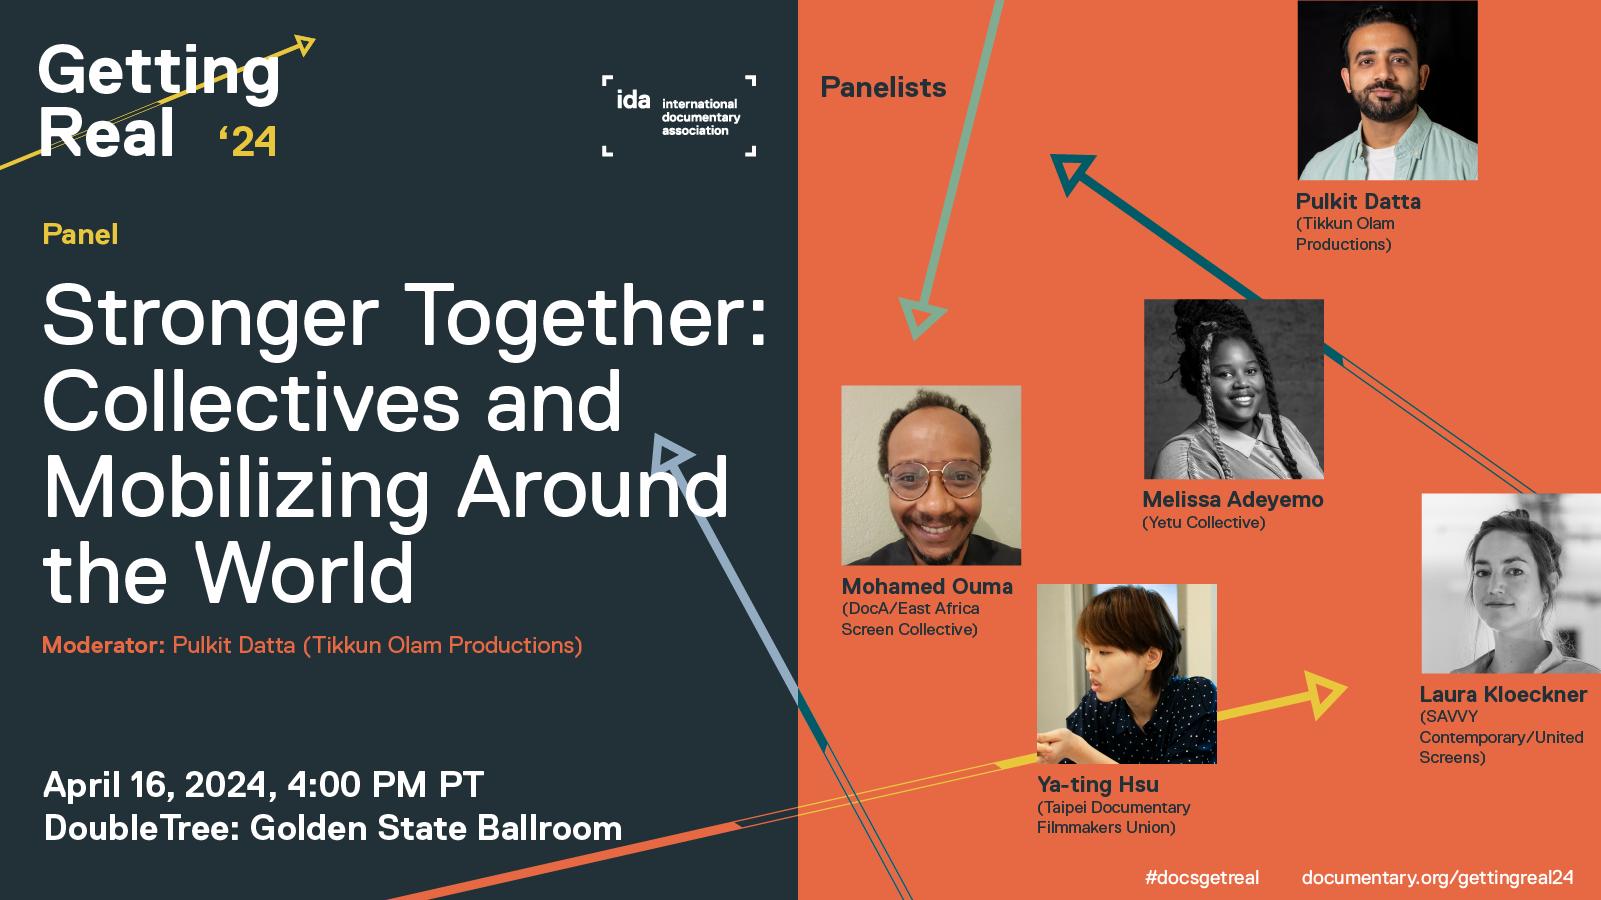 4PM Stronger Together: Collectives and Mobilizing Around the World